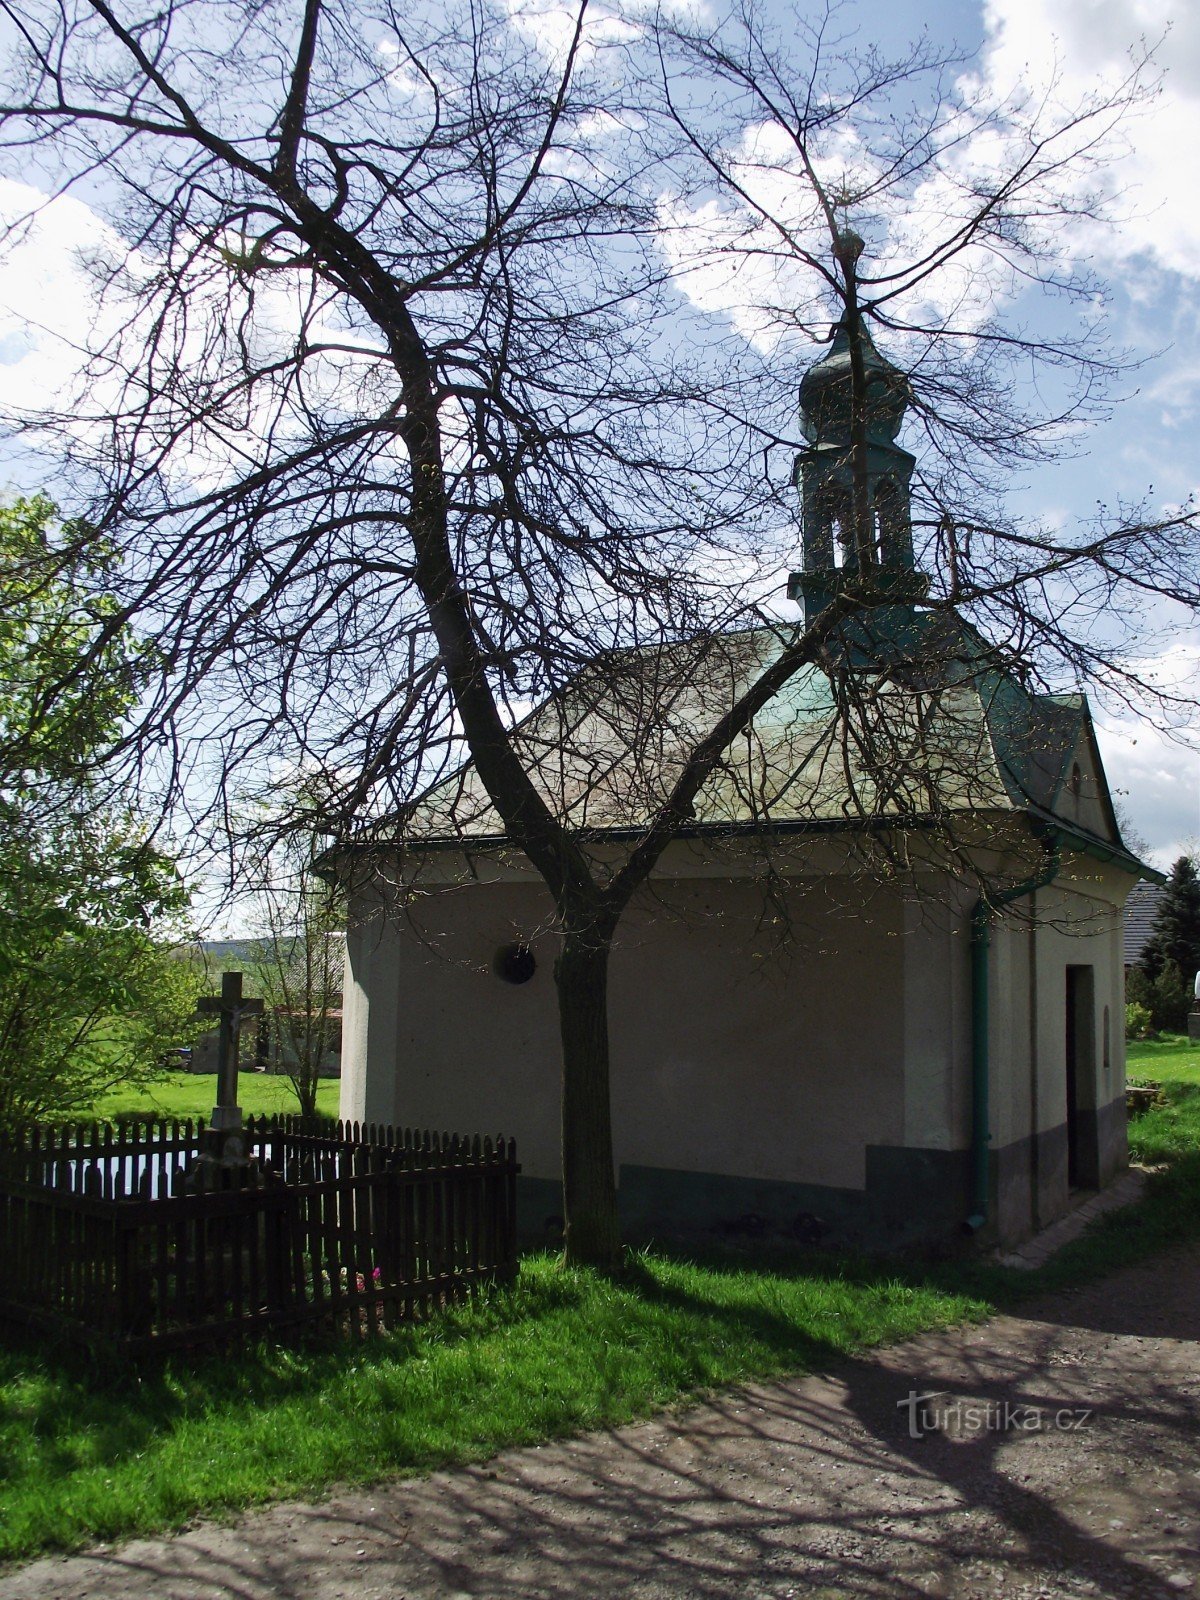 spa chapel with a cross